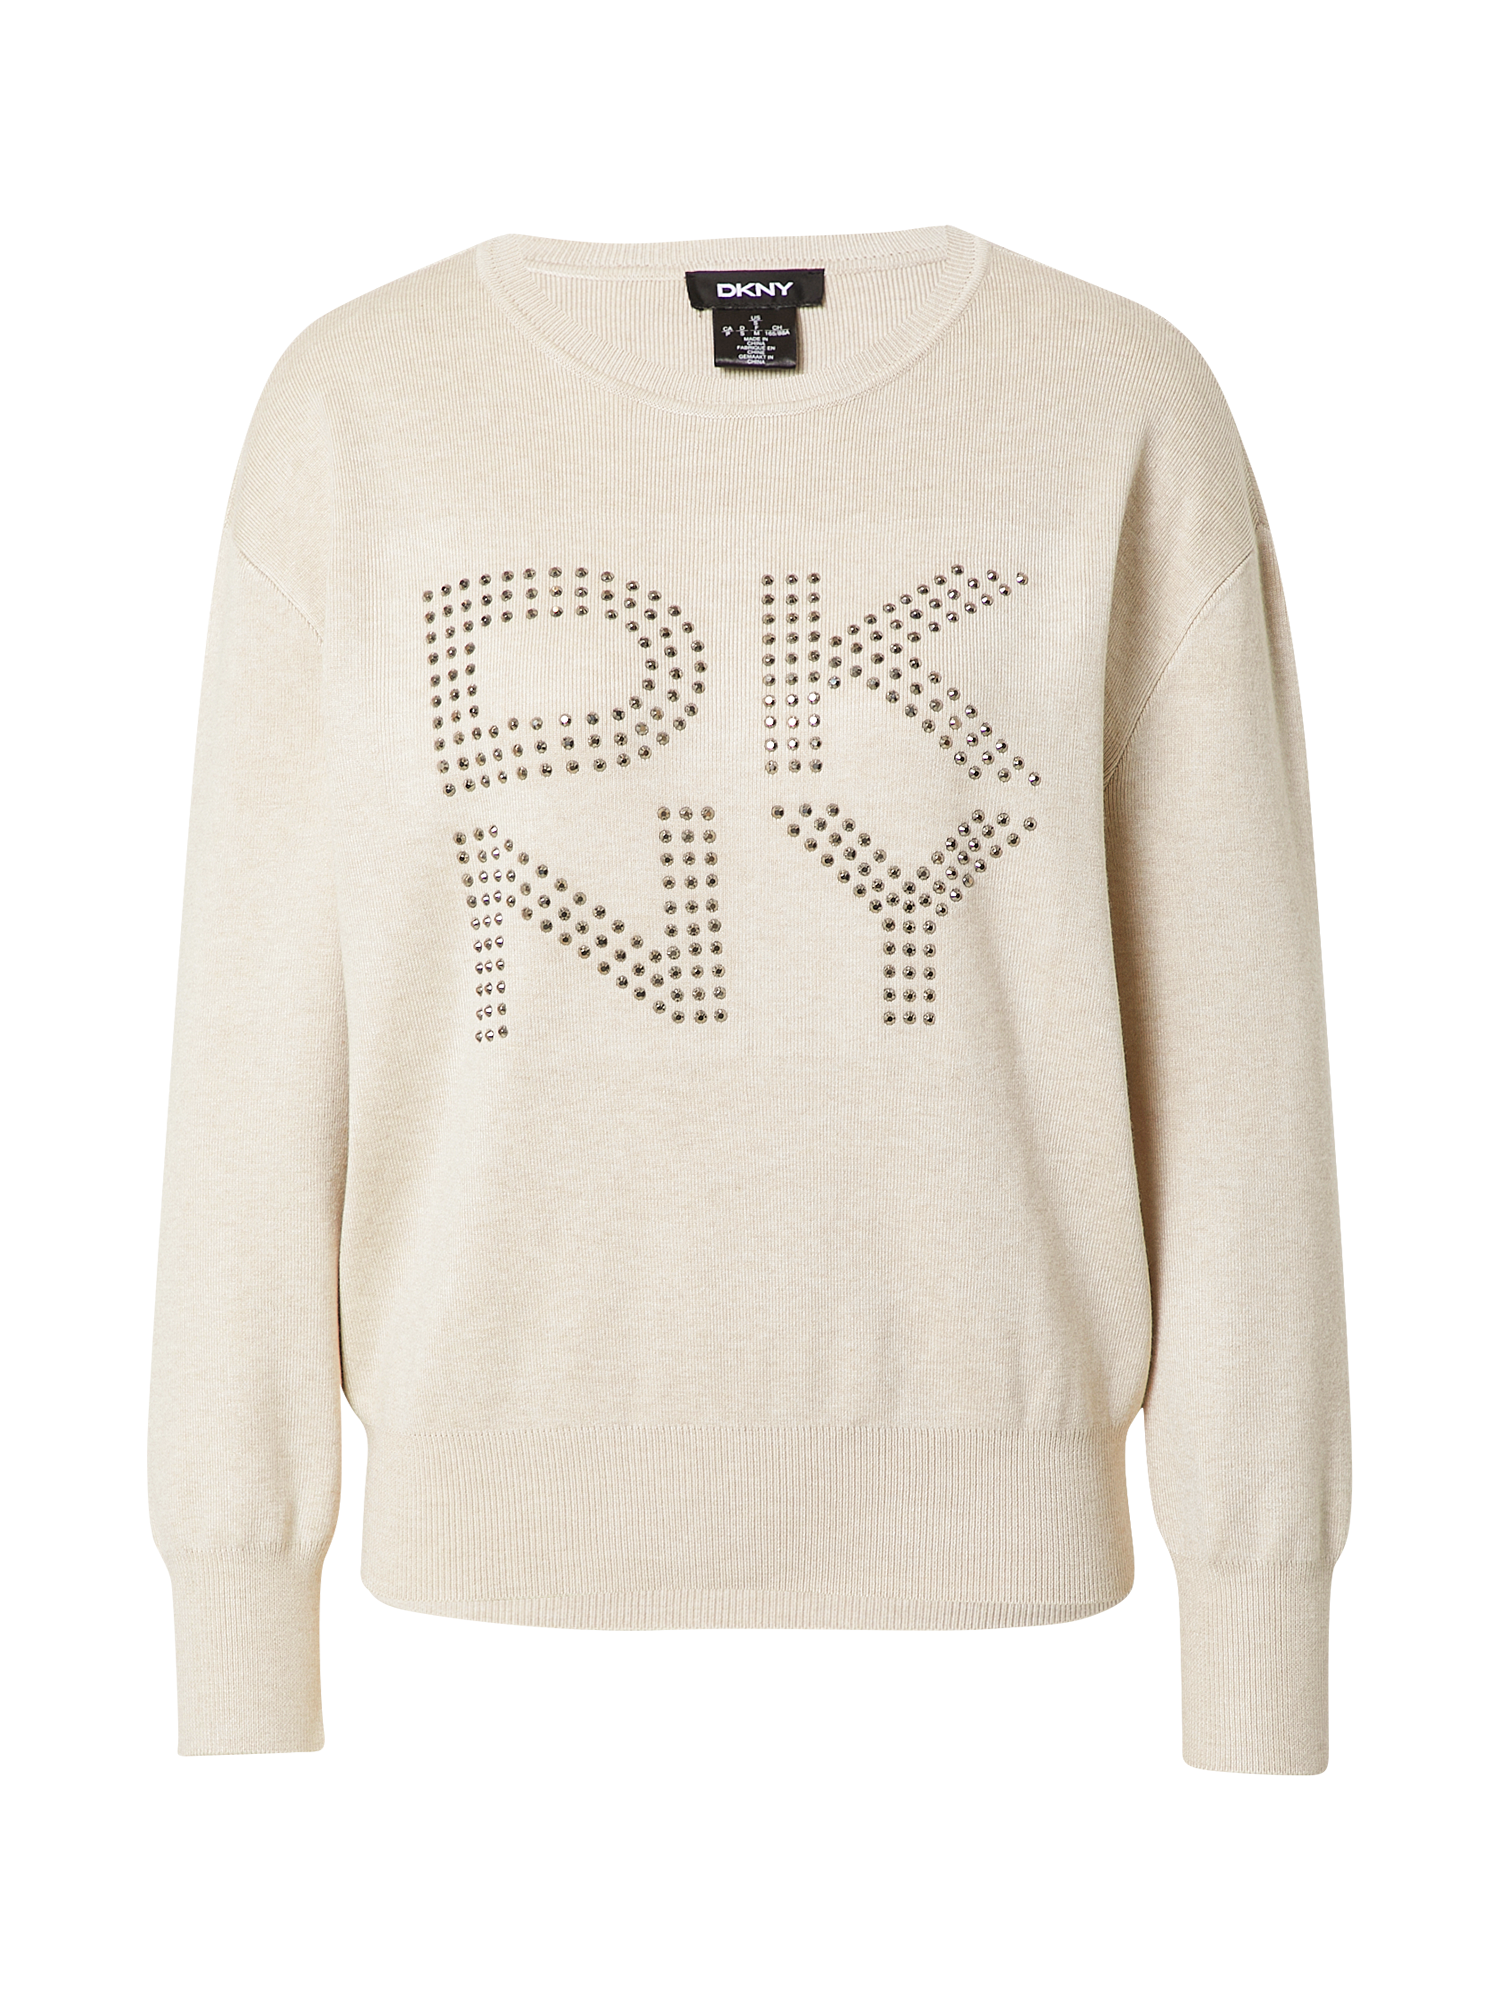 Taglie comode Donna DKNY Pullover in Crema 